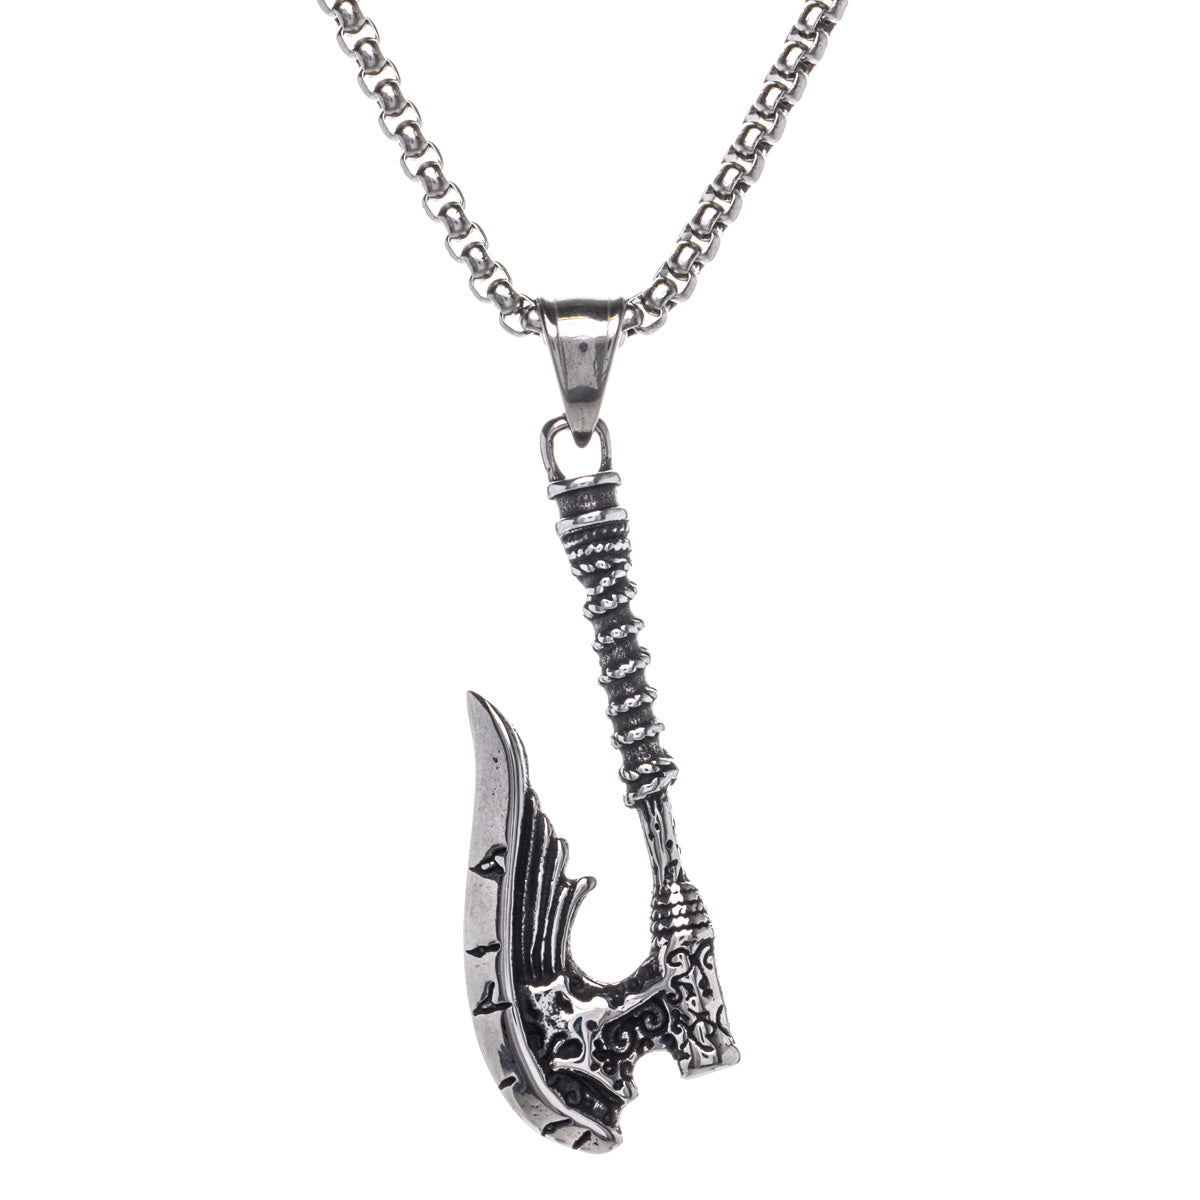 Vikings with wings pendant necklace (Steel 316L)